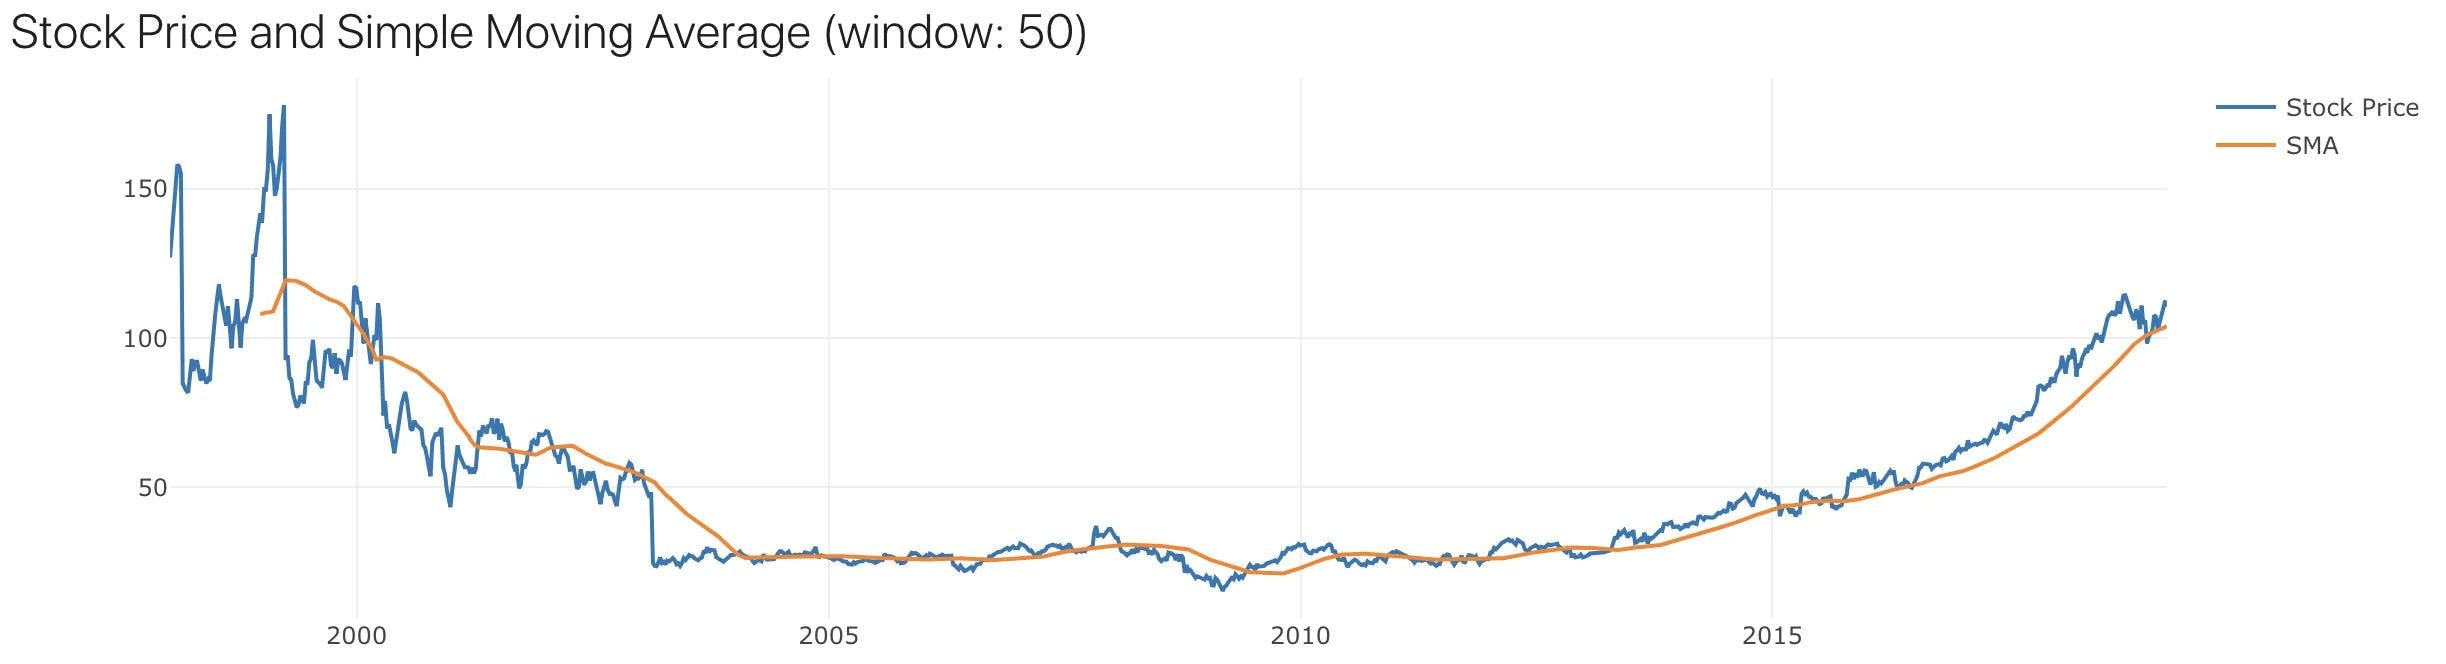 Simple Moving Average of Microsoft Corporation closing prices data